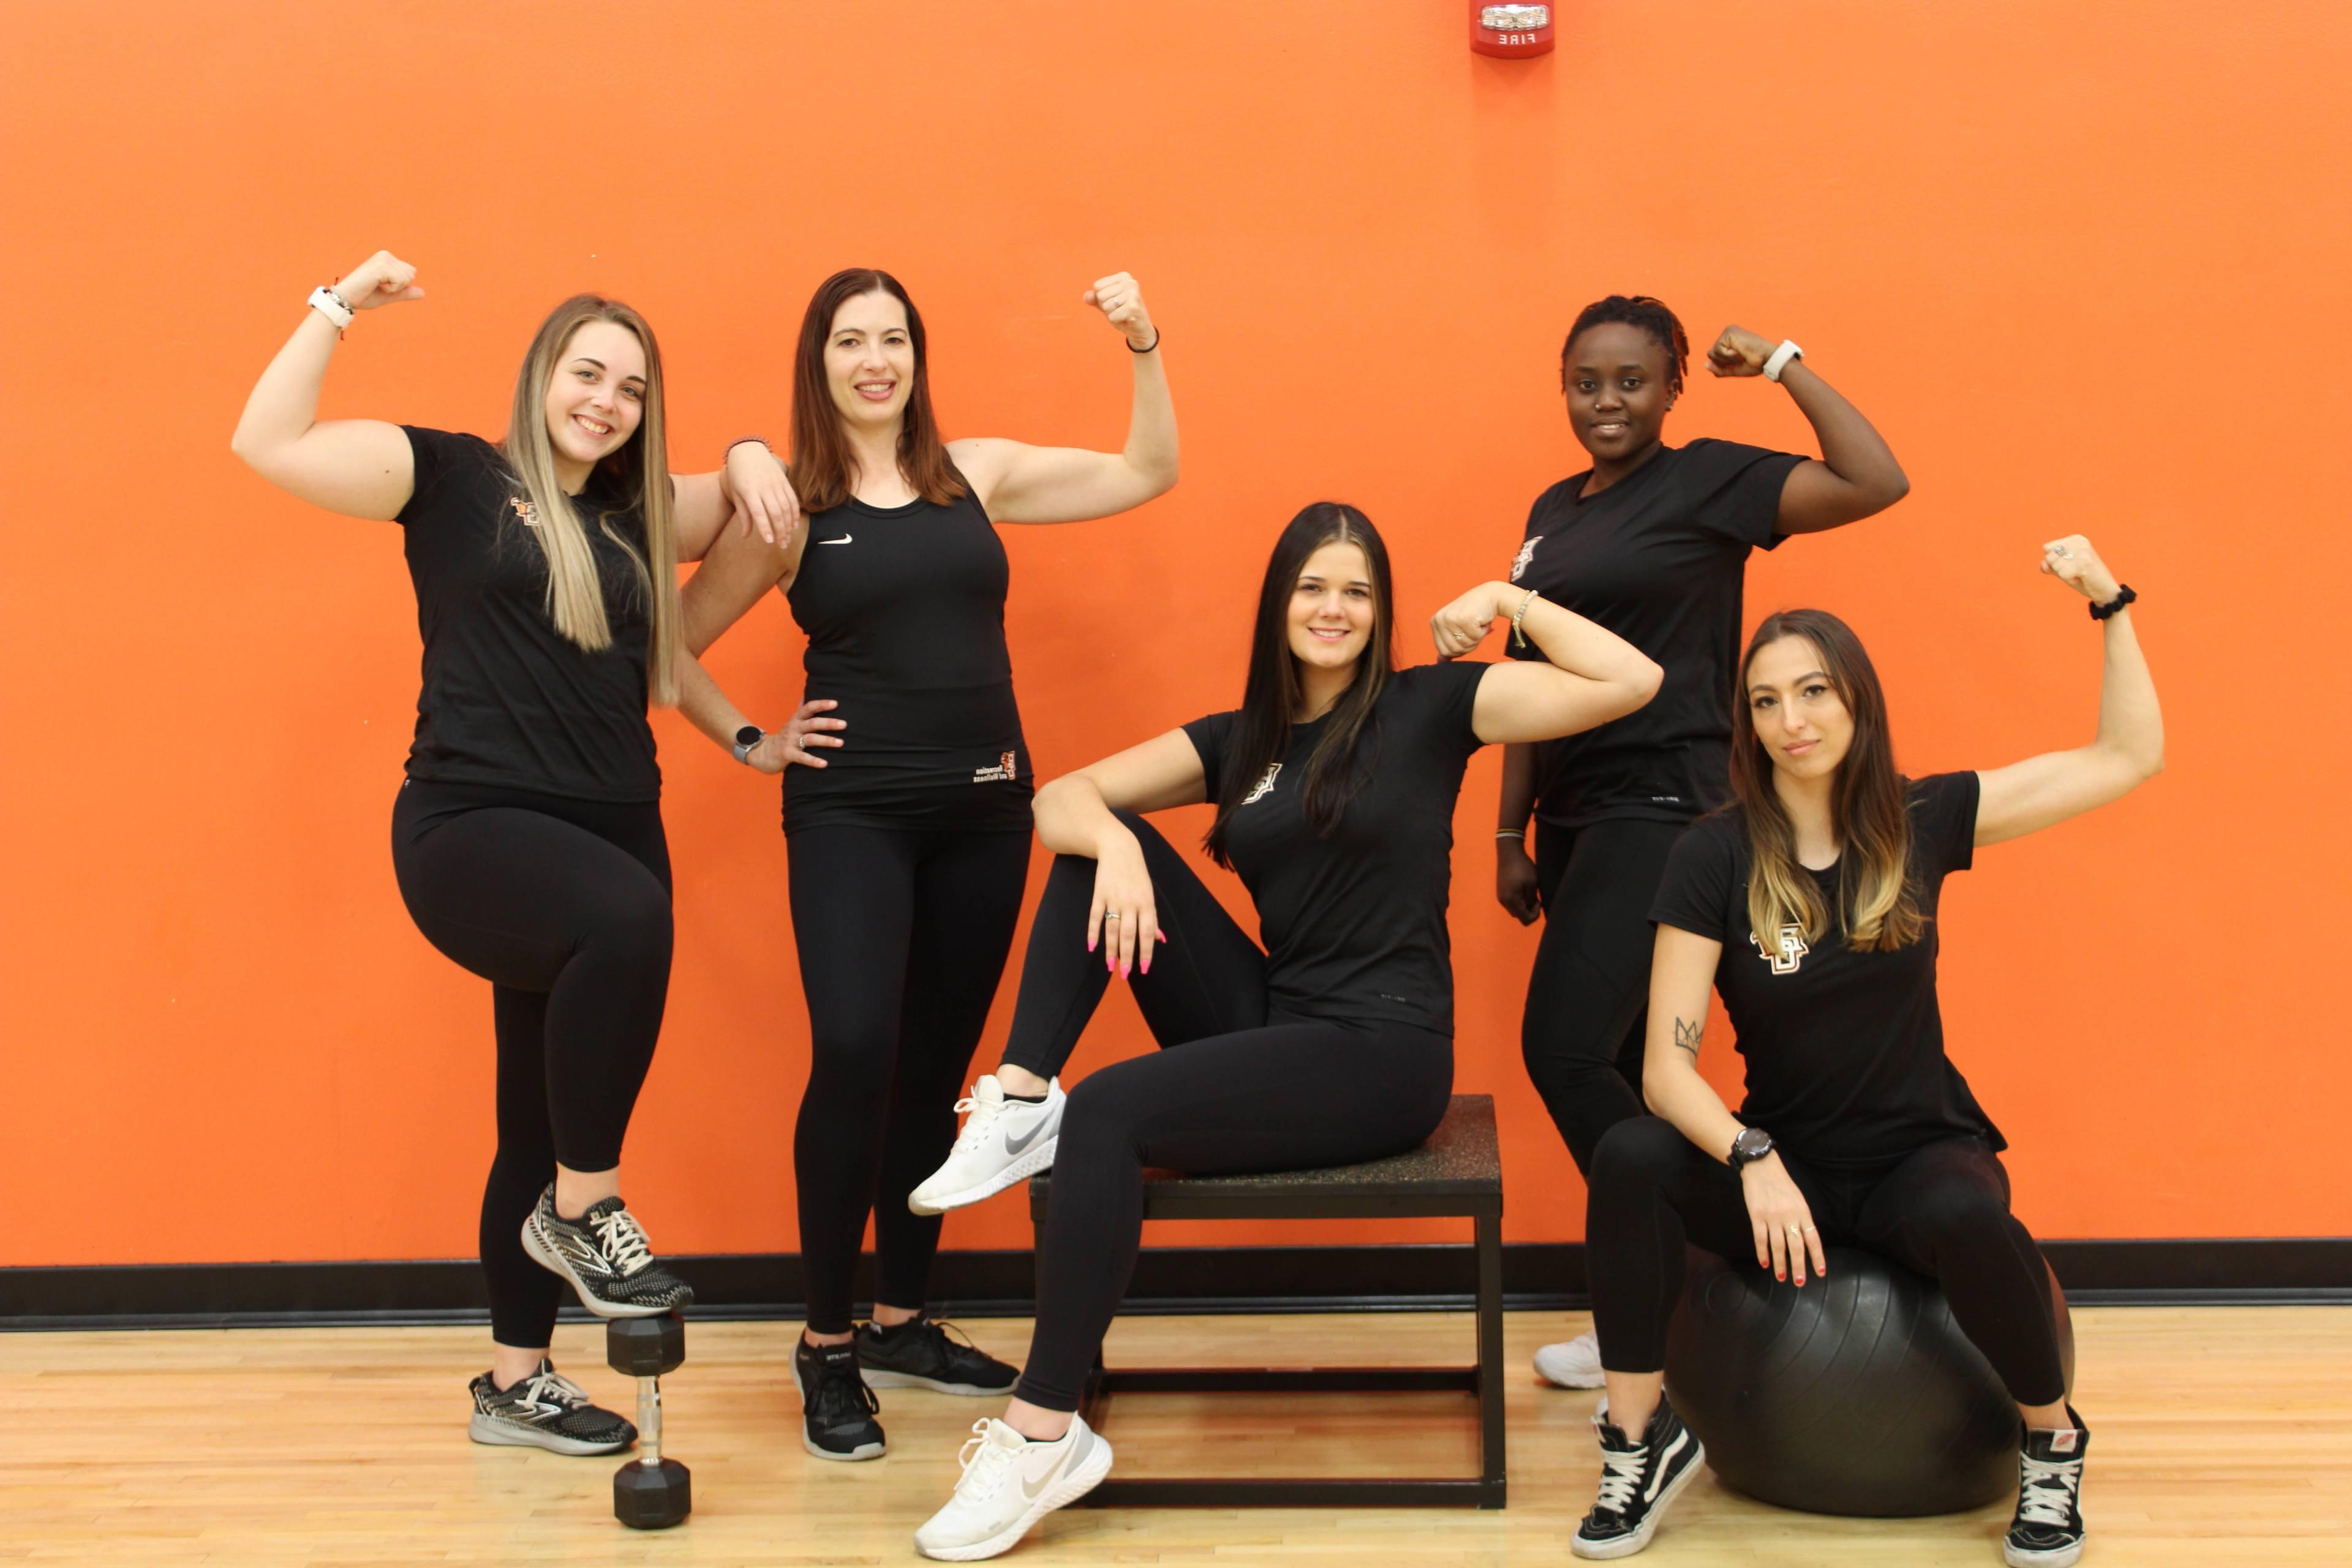 5 trainers posing with arms held high wearing black fitness staff apparel